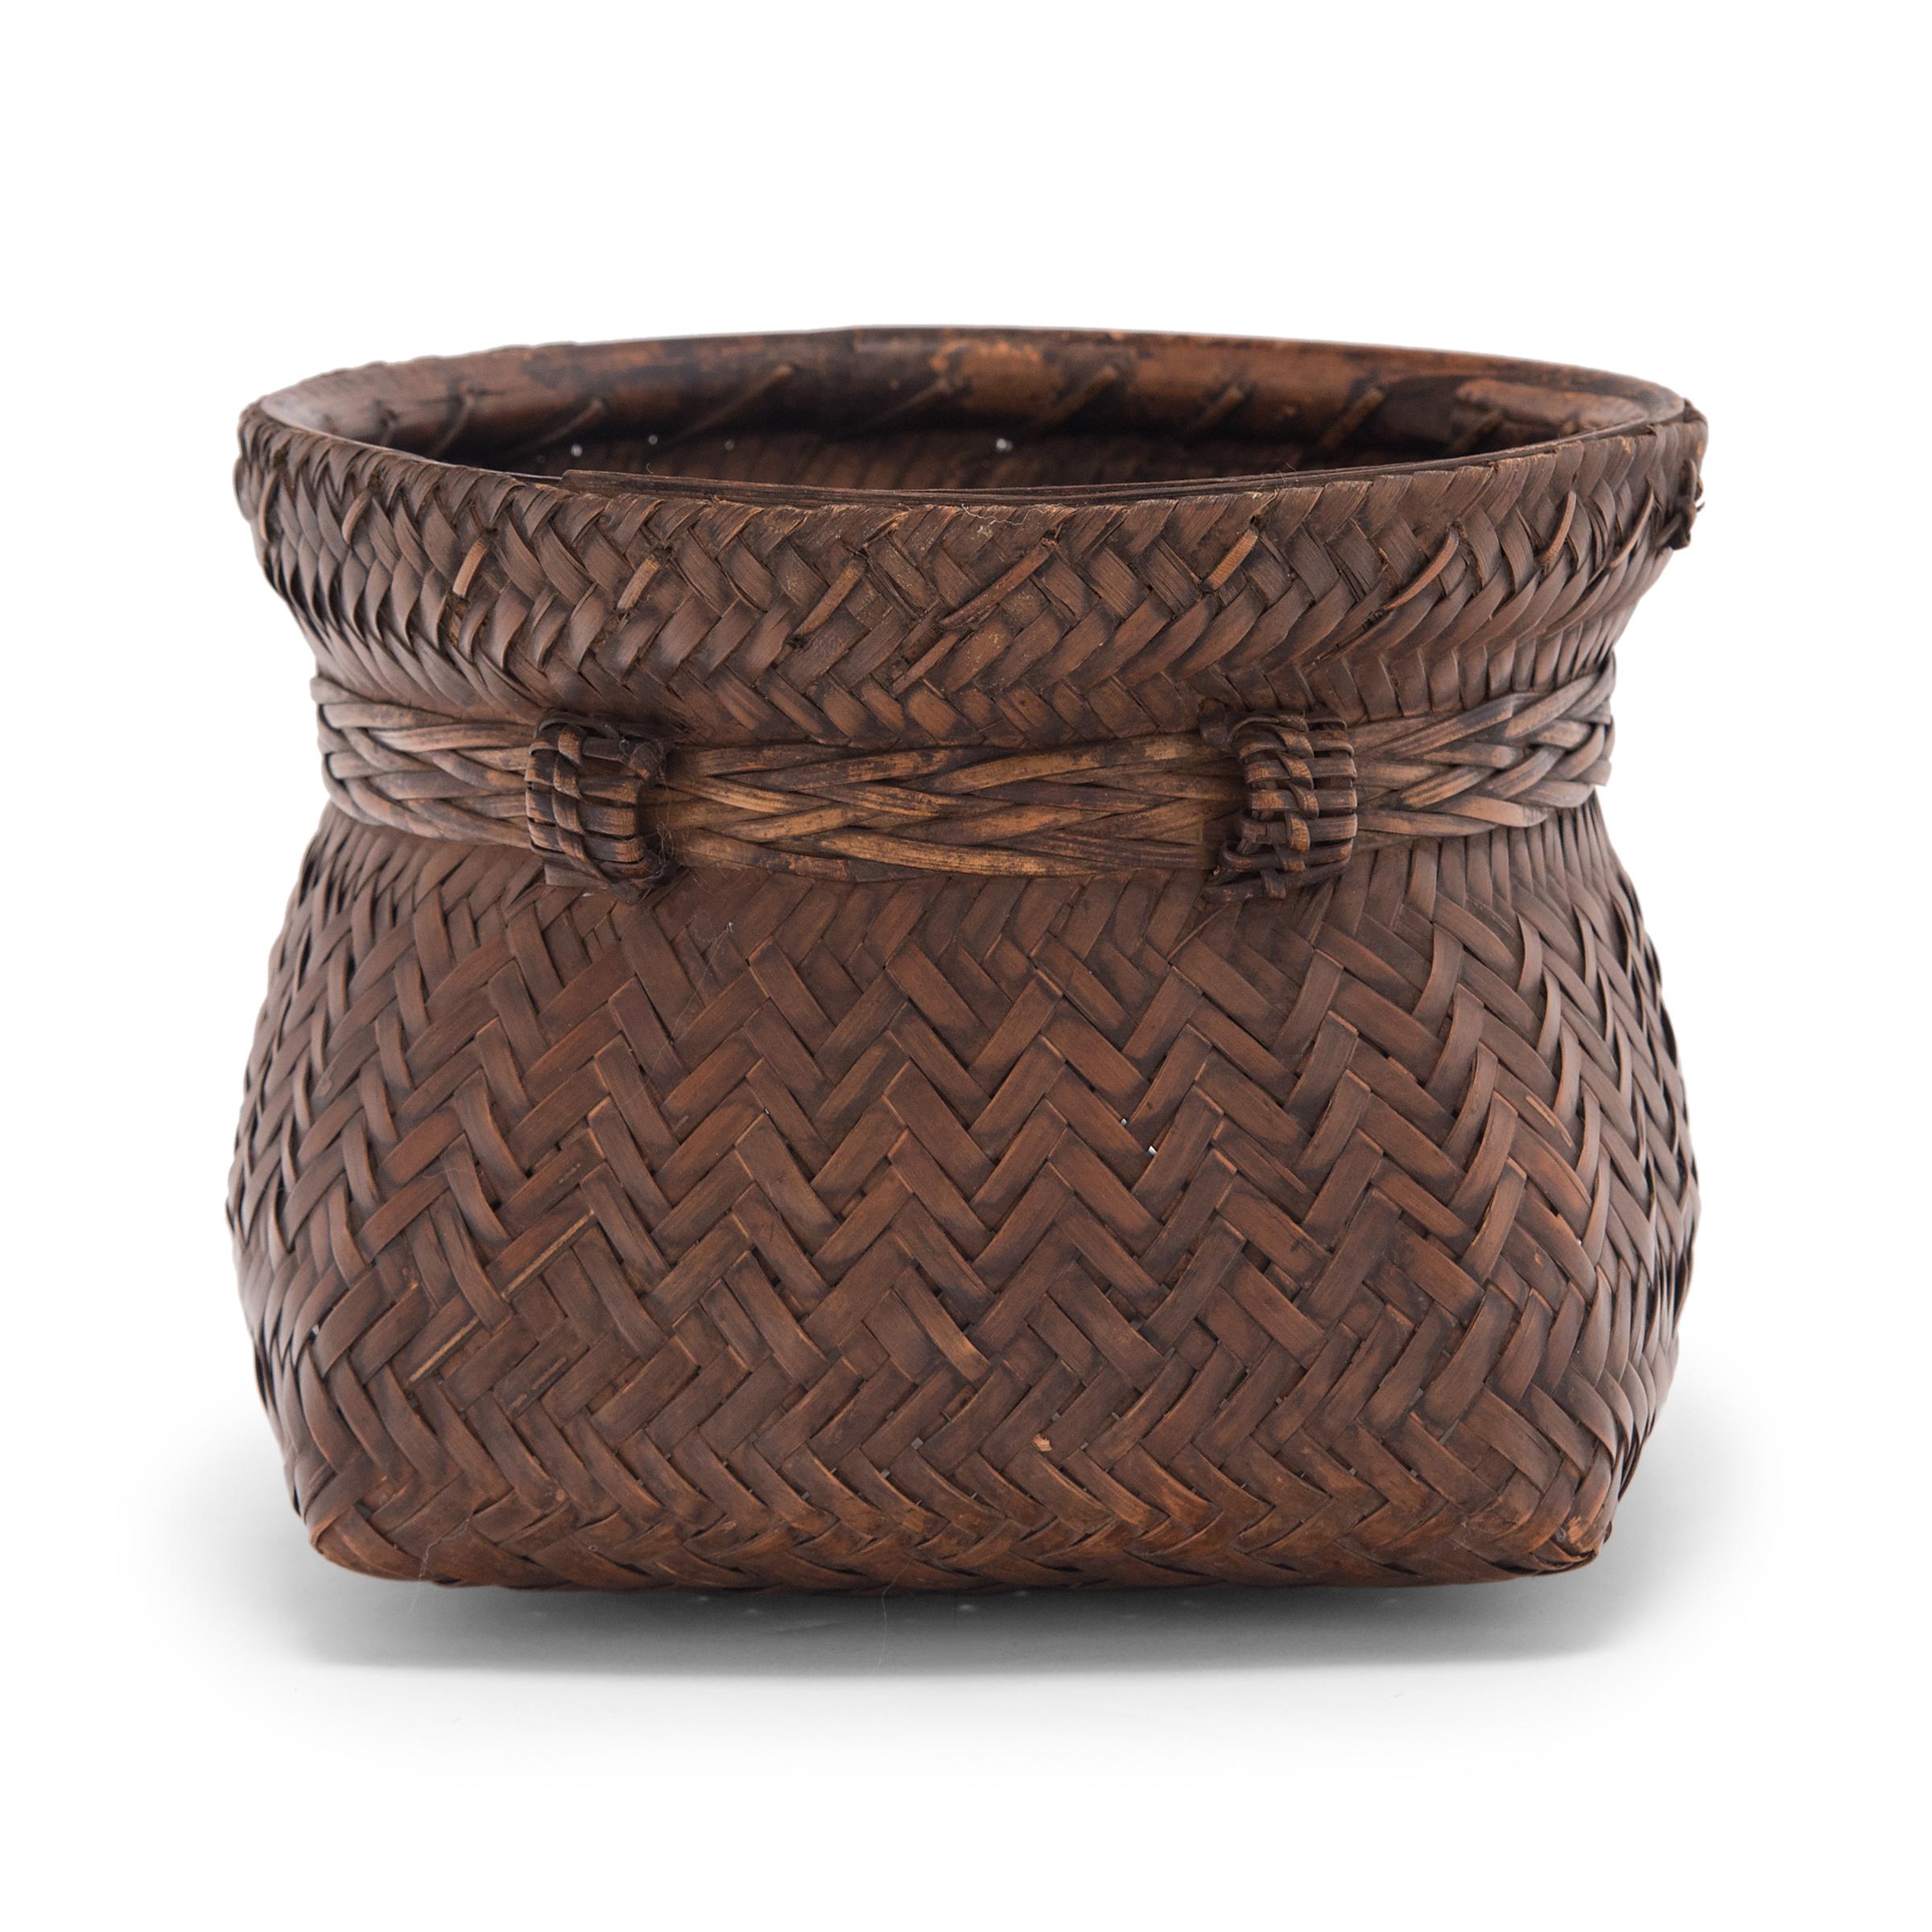 This vintage square basket is beautifully woven of thin strips of smoked bamboo in alternating diagonal twill patterns. The woven sides are secured to a rigid bamboo frame at the opening and cinched by a braided band for a more defined shape.